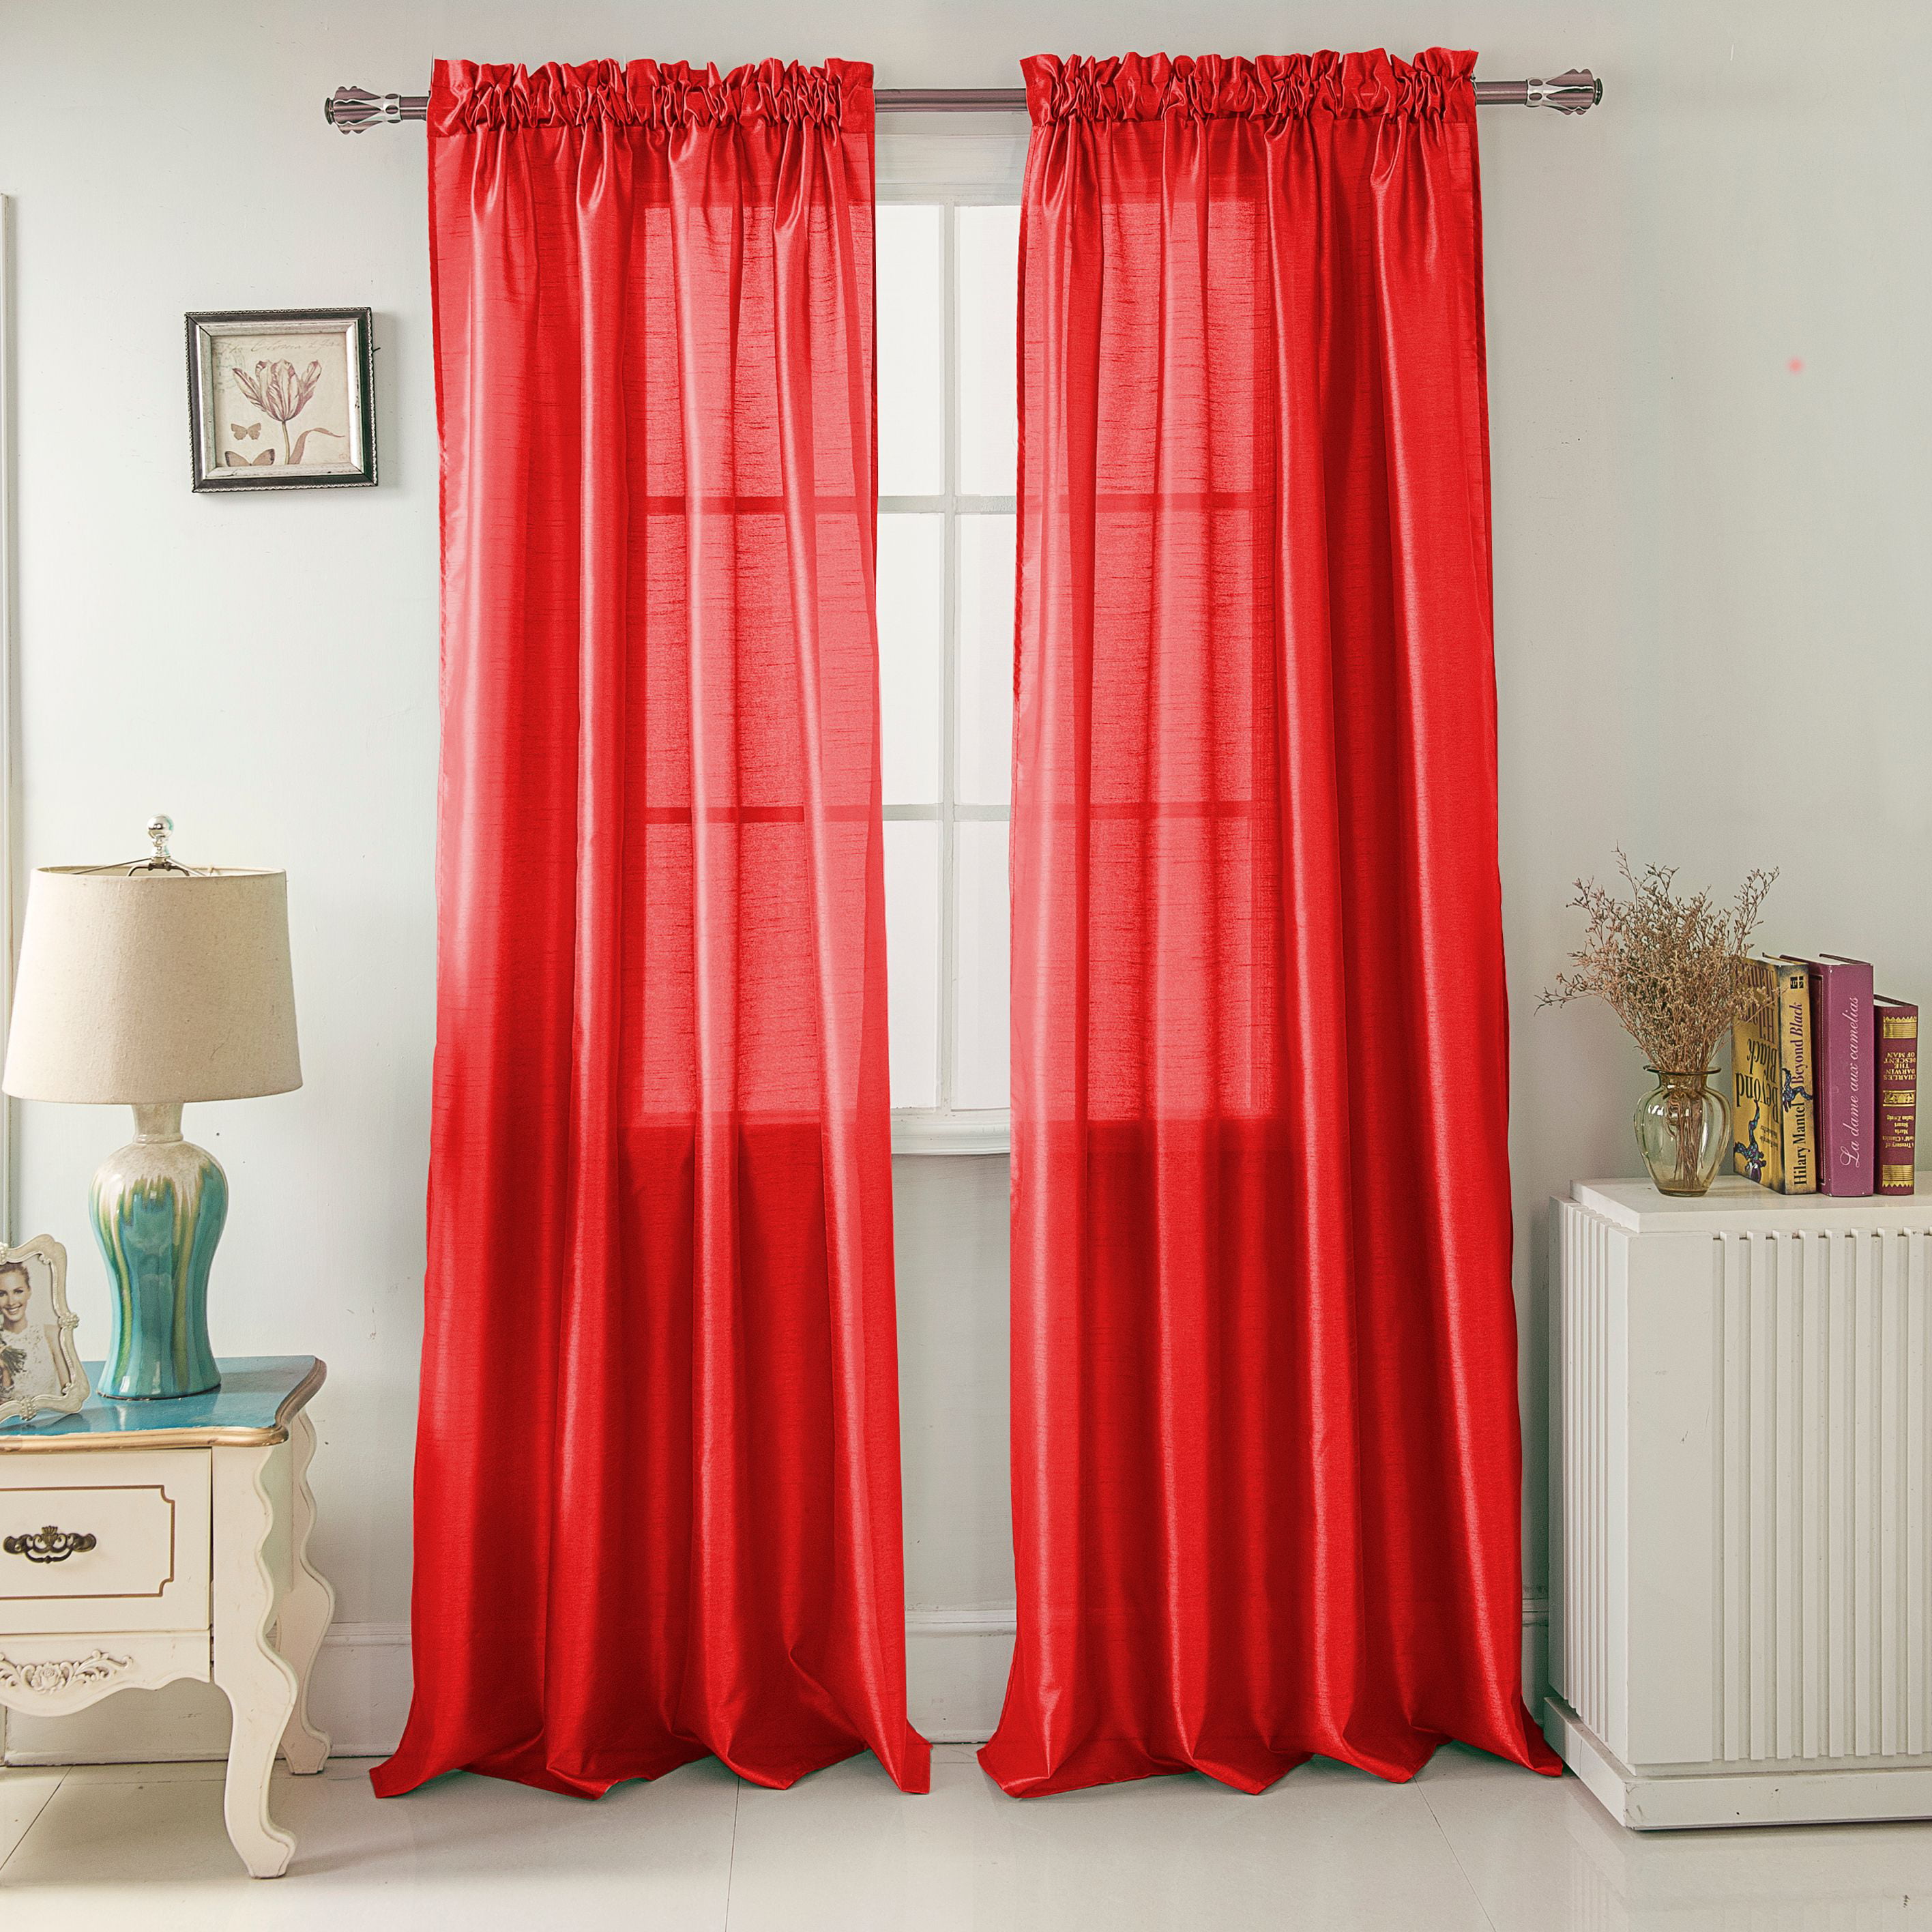 NEW Deep Red Eyelet Fully Lined Faux Silk Curtains with Tie Backs 